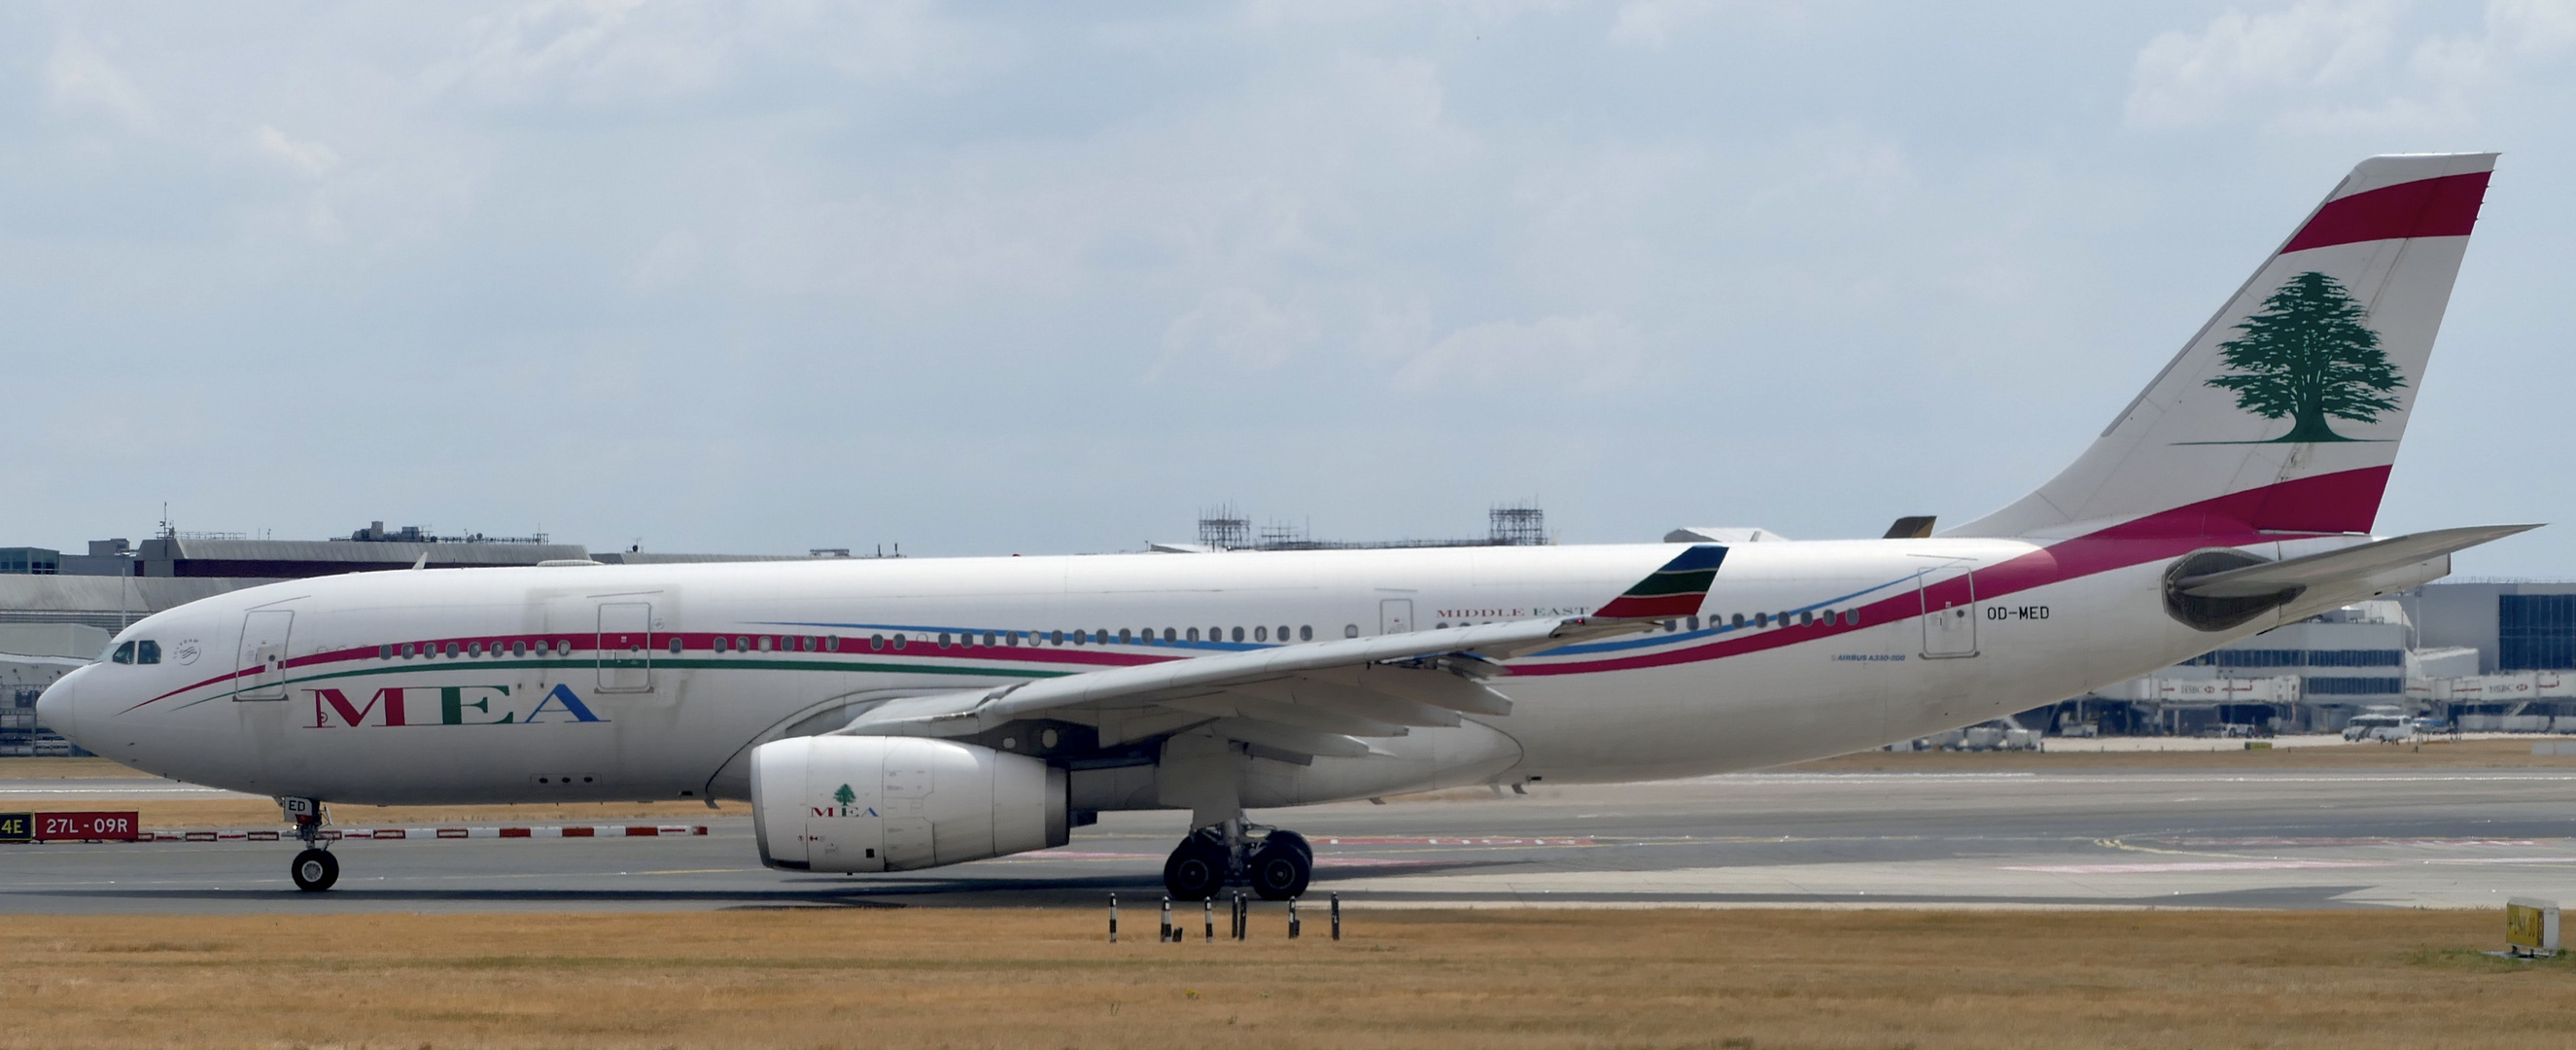 Middle East Airlines A330-200 in London Heathrow